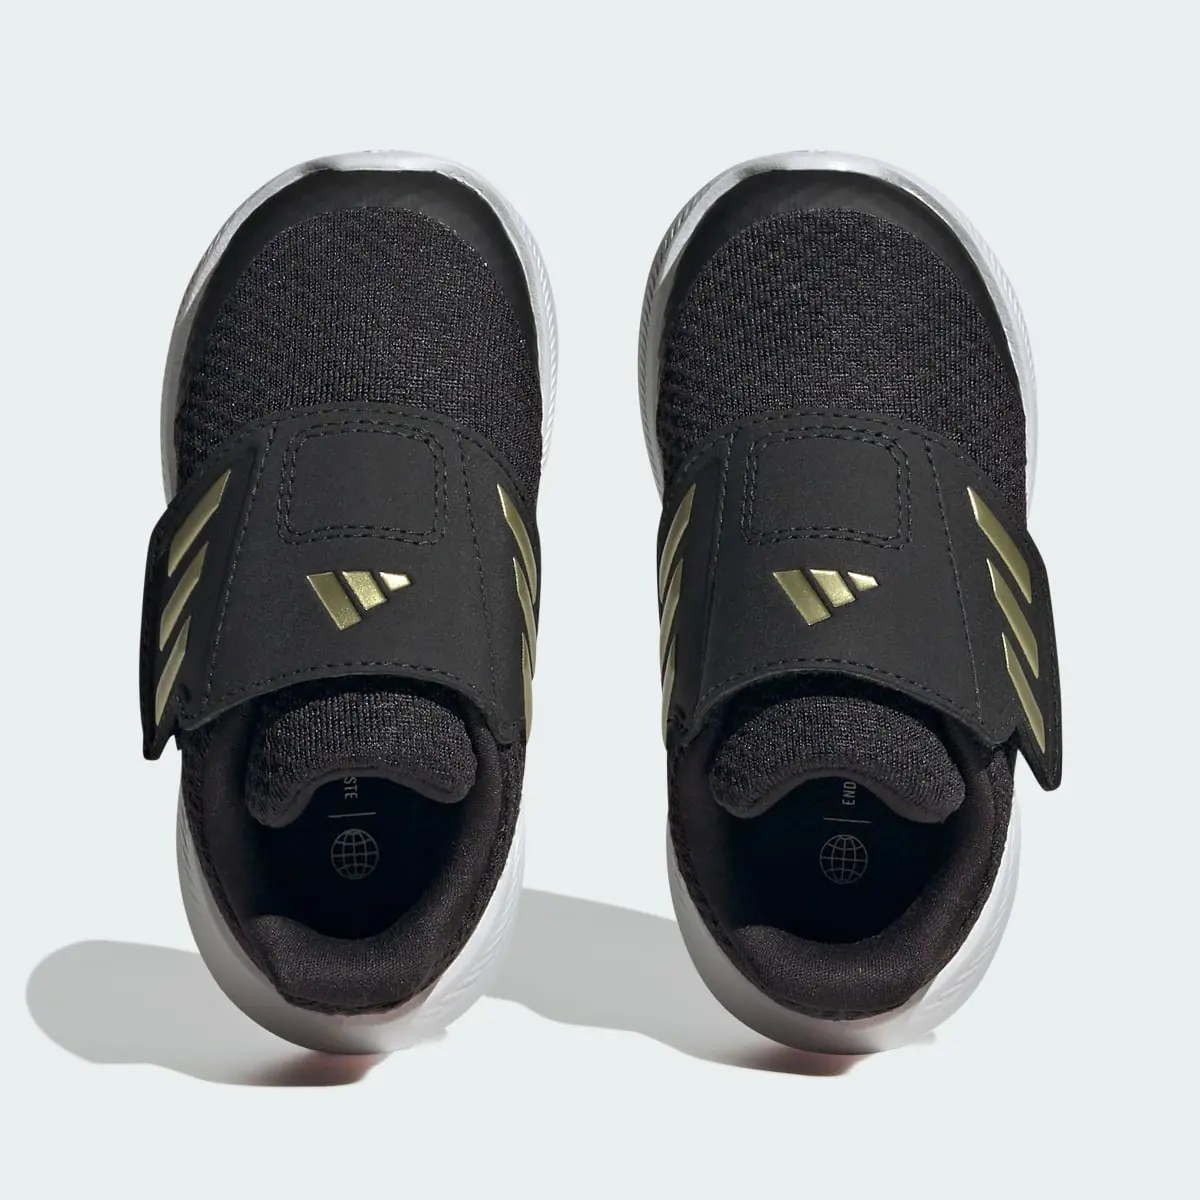 Adidas Runfalcon 3.0 Sport Running Hook-and-Loop Shoes. 3